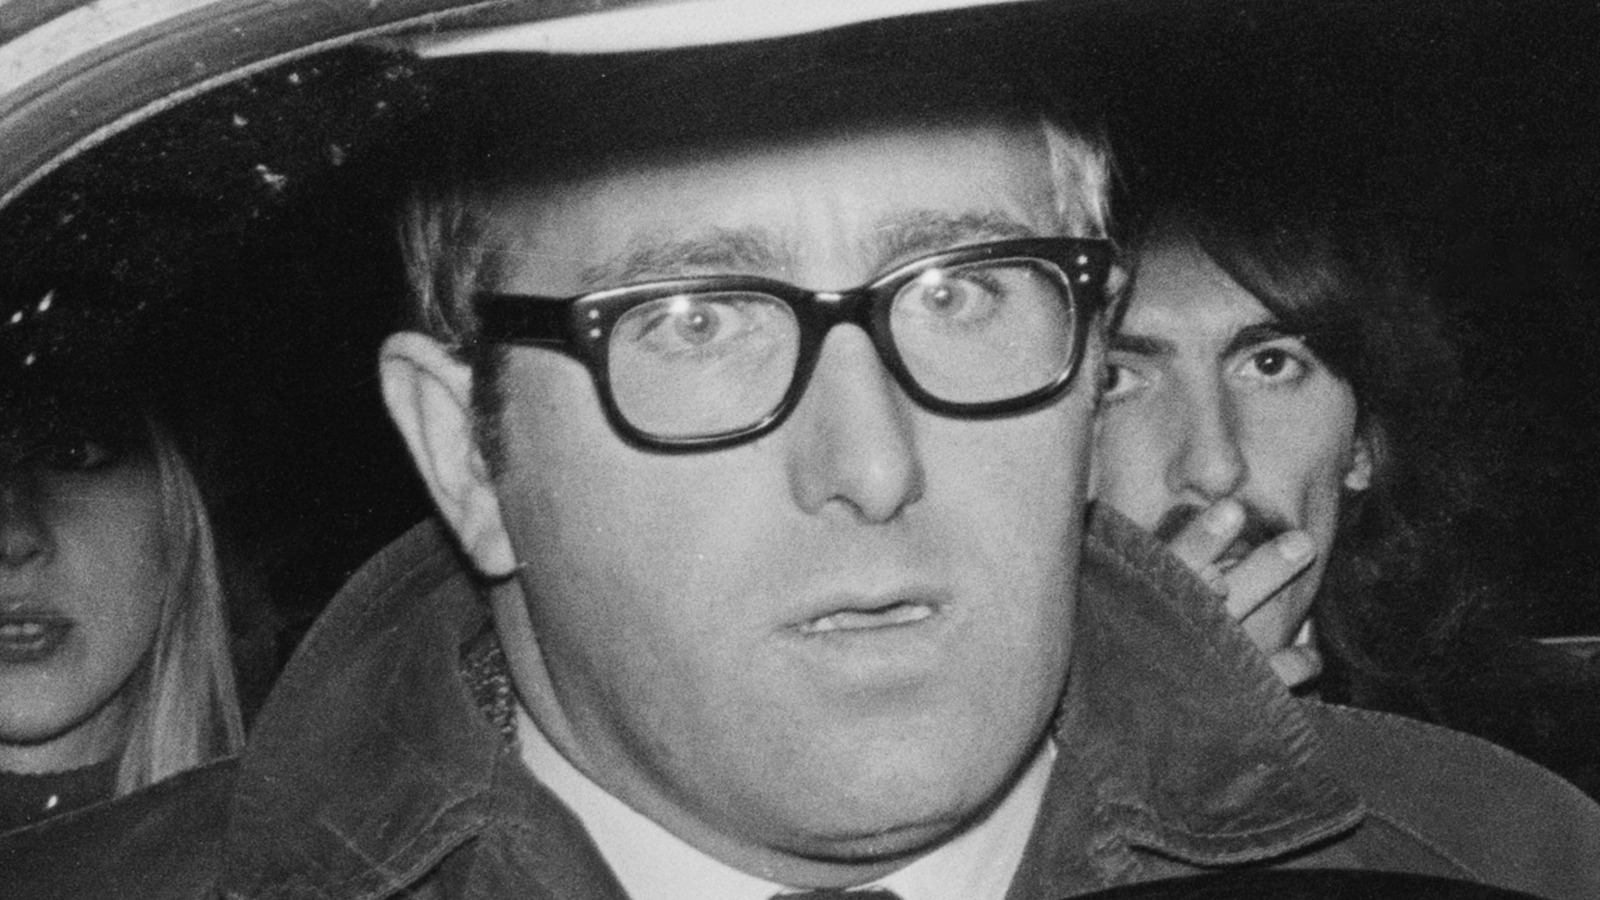 The Tragic 1976 Death Of The Beatles’ Road Manager Mal Evans